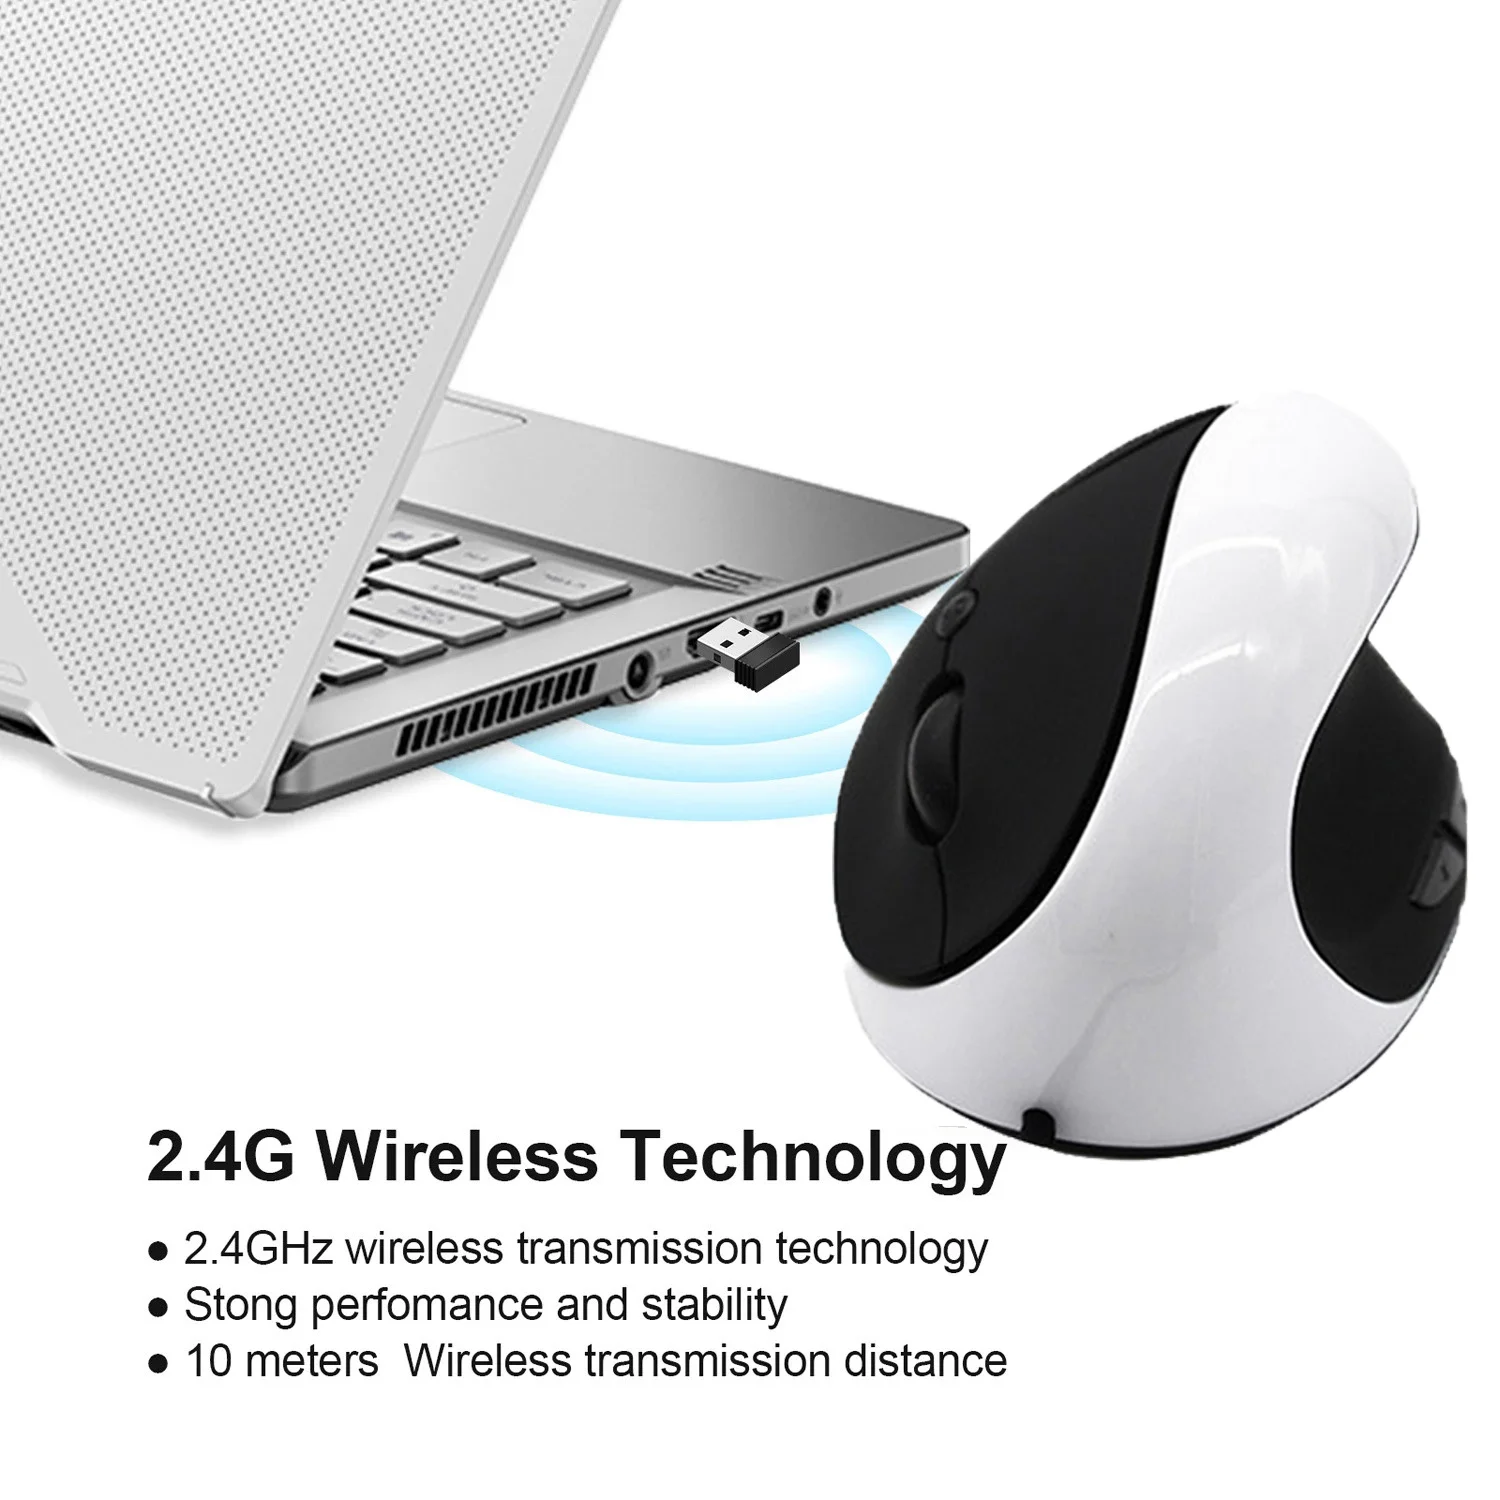 

Vertical Mouse USB Rechargeable 1600DPI Gaming Mice 2.4Ghz Wireless Right Hand Wrist Healthy Computer Mause For Laptop PC